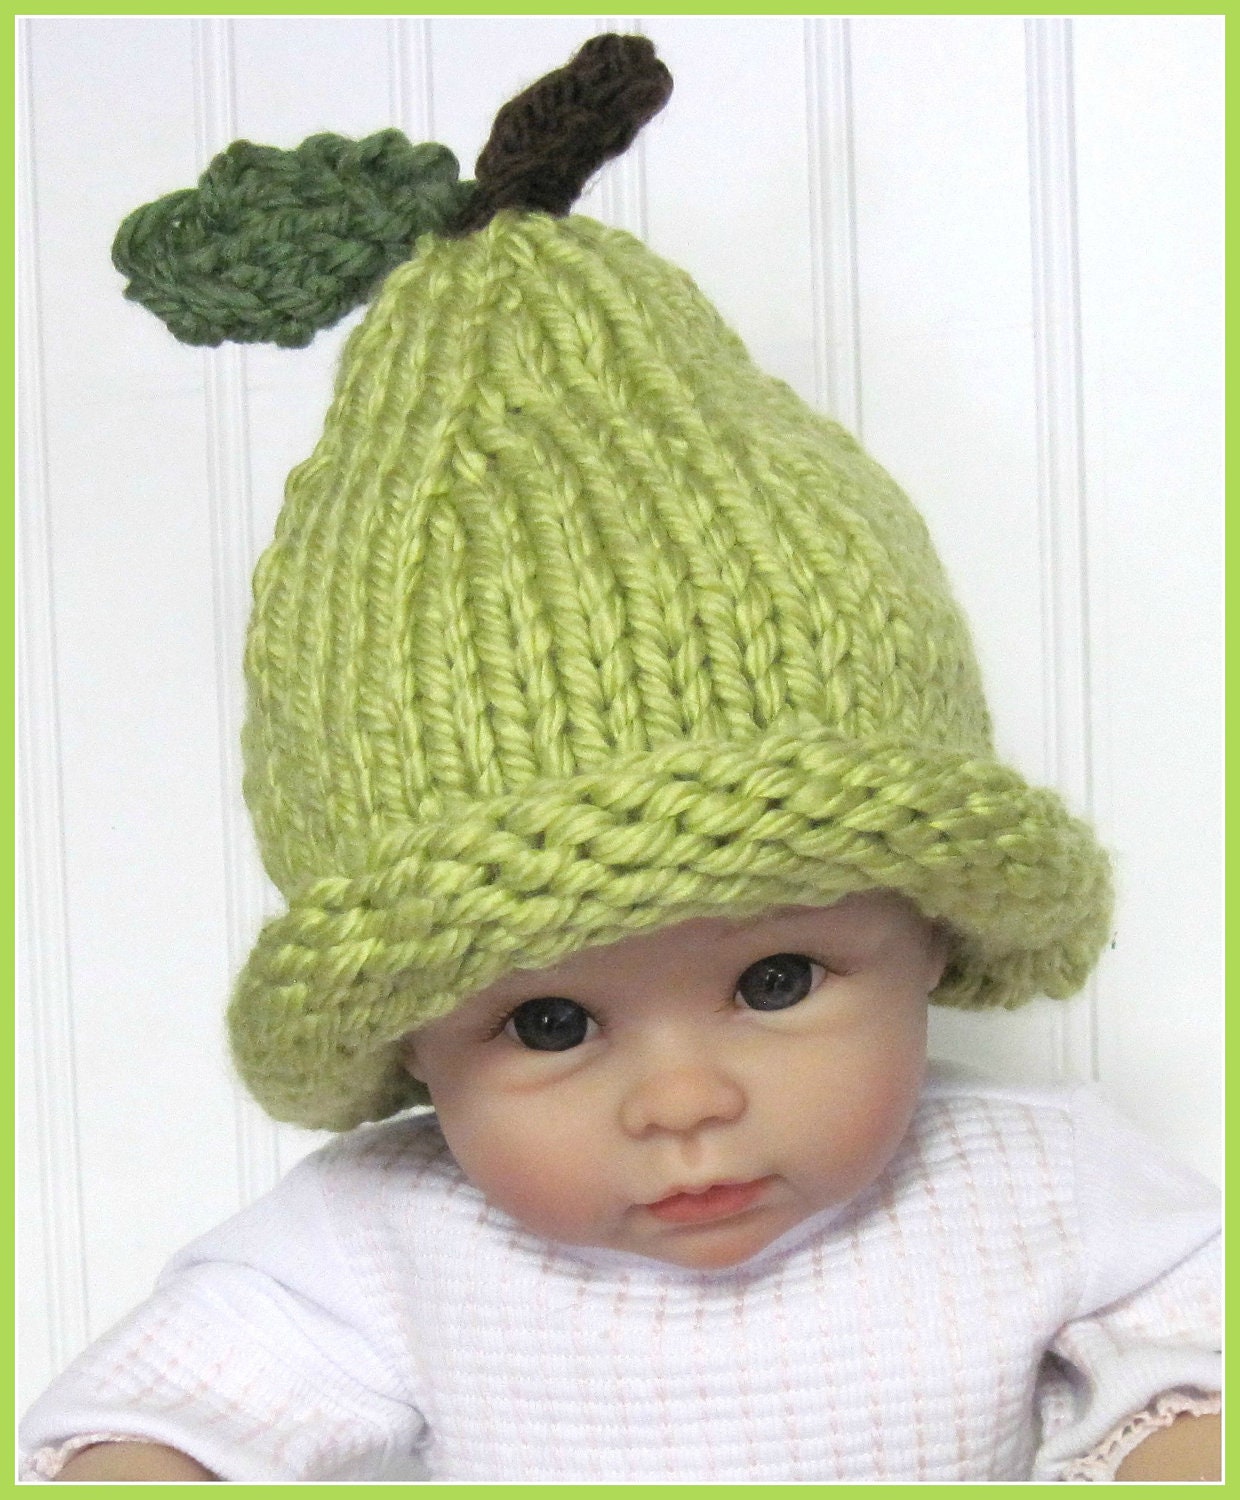 Pear Hat Knitting Pattern From Baby to Toddler to Child | Etsy